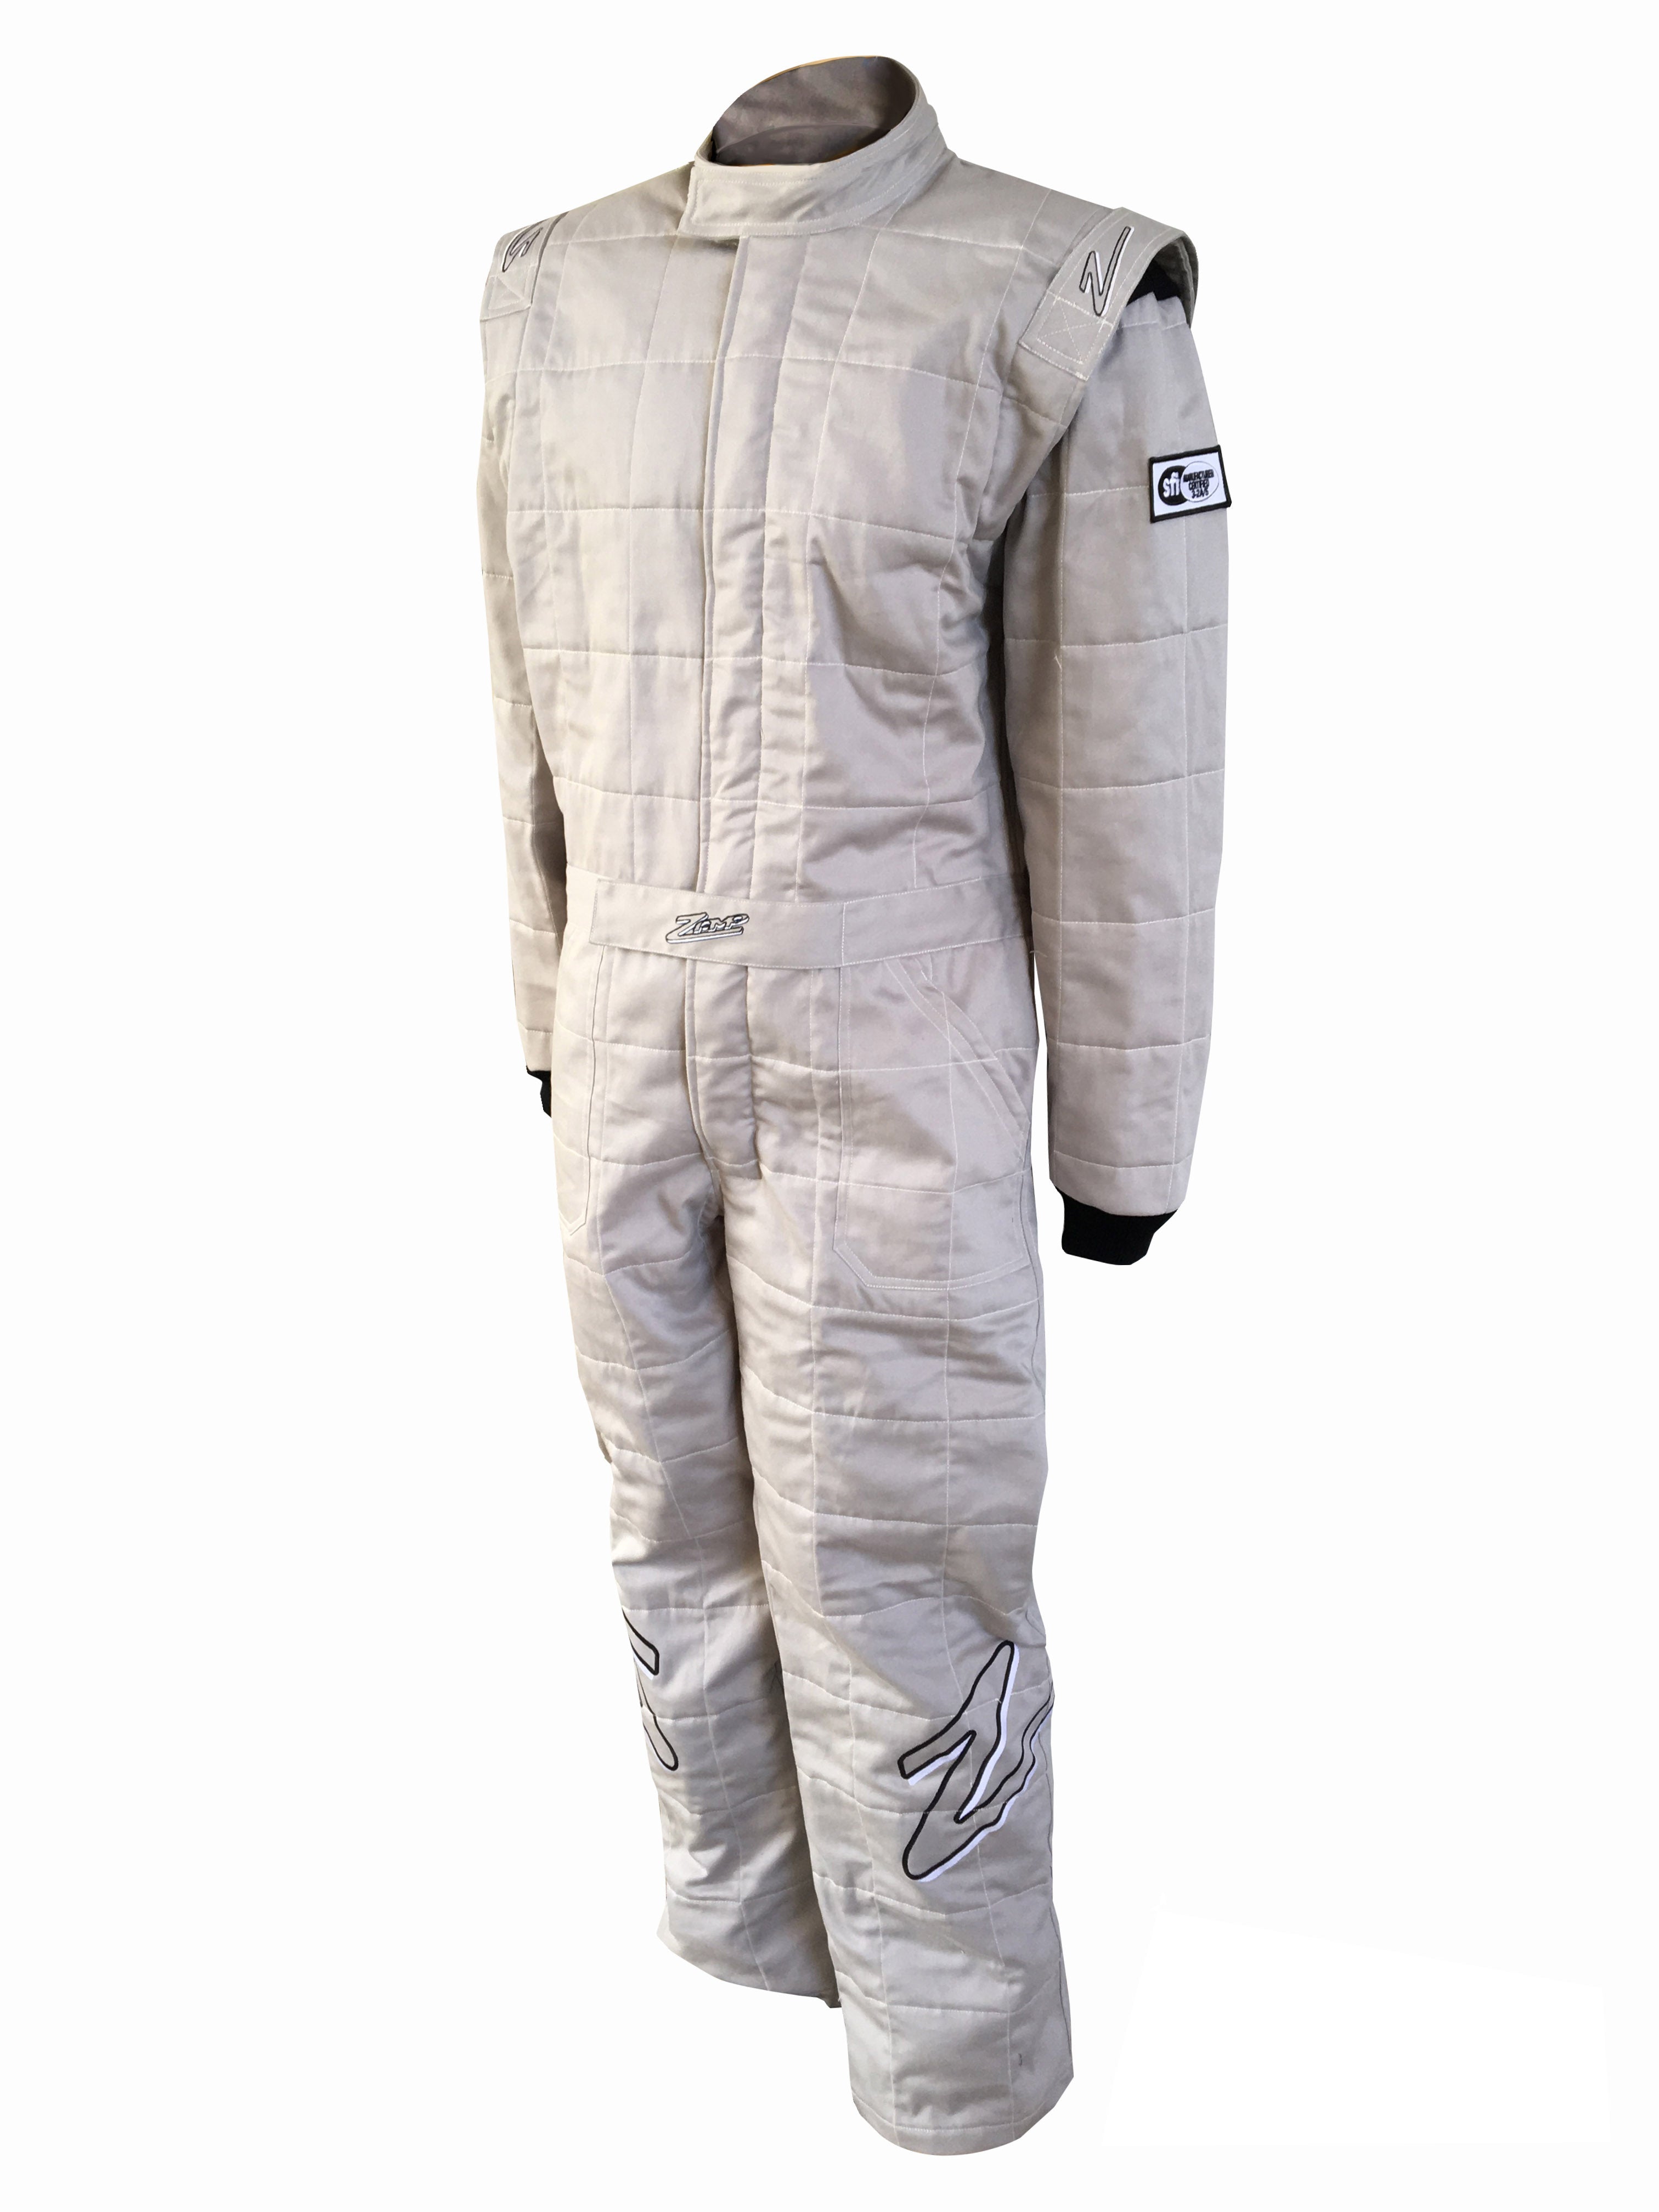 Zamp Solar Suit ZR-30 3 Layer Large Gray SFI 3.2A/5 Safety Clothing Driving Suits main image